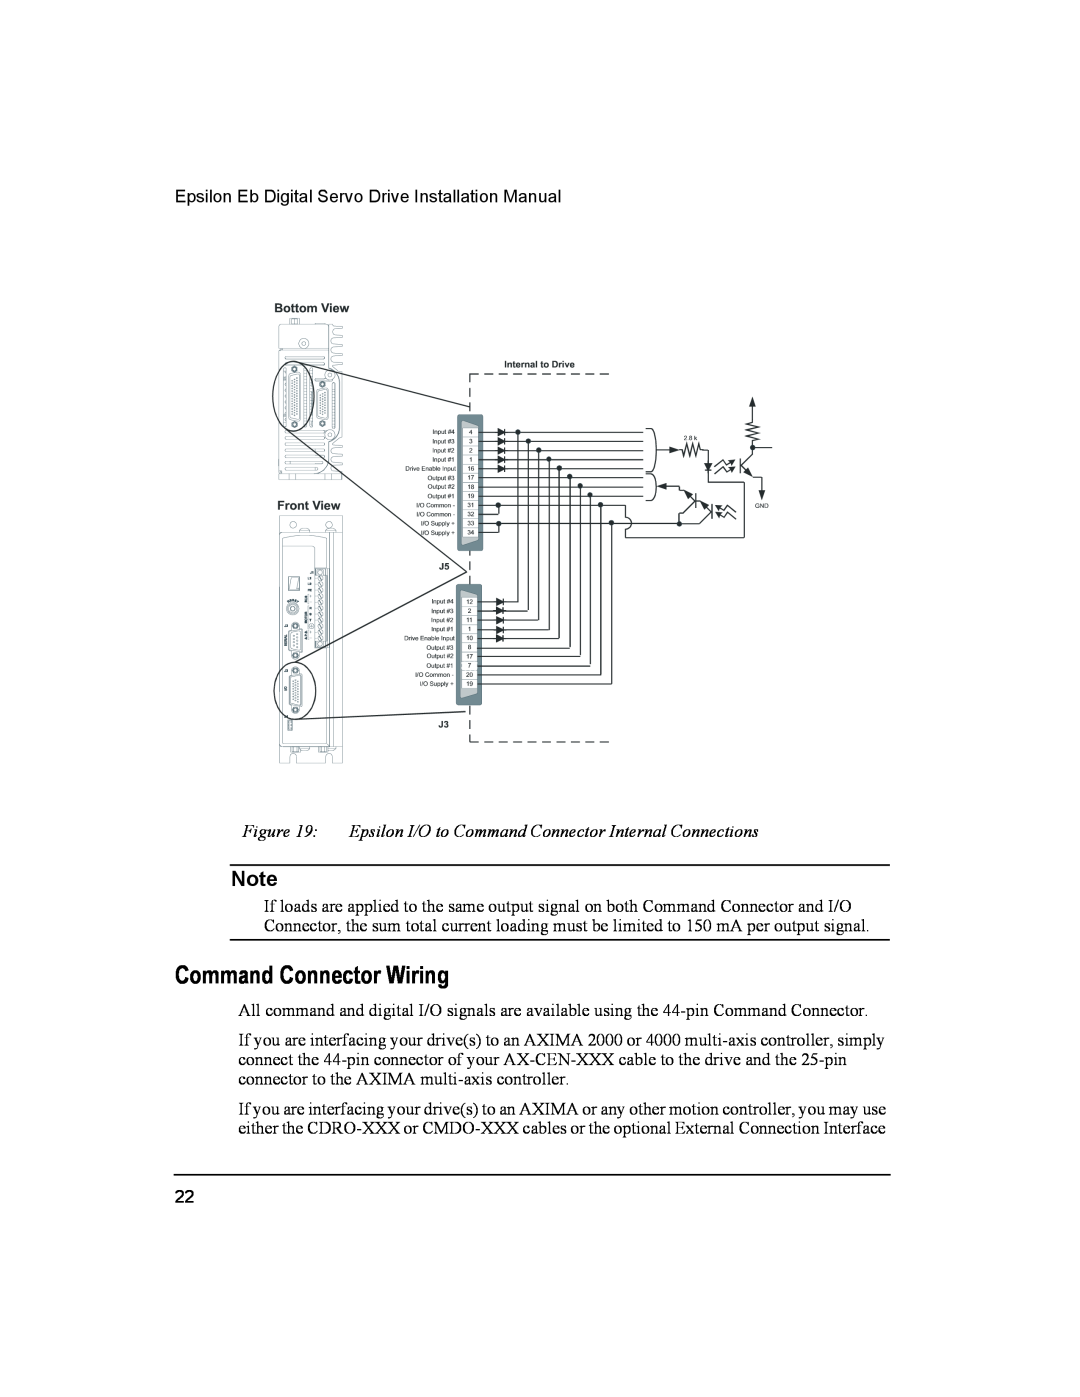 Emerson 400501-05 installation manual Command Connector Wiring, Epsilon I/O to Command Connector Internal Connections 